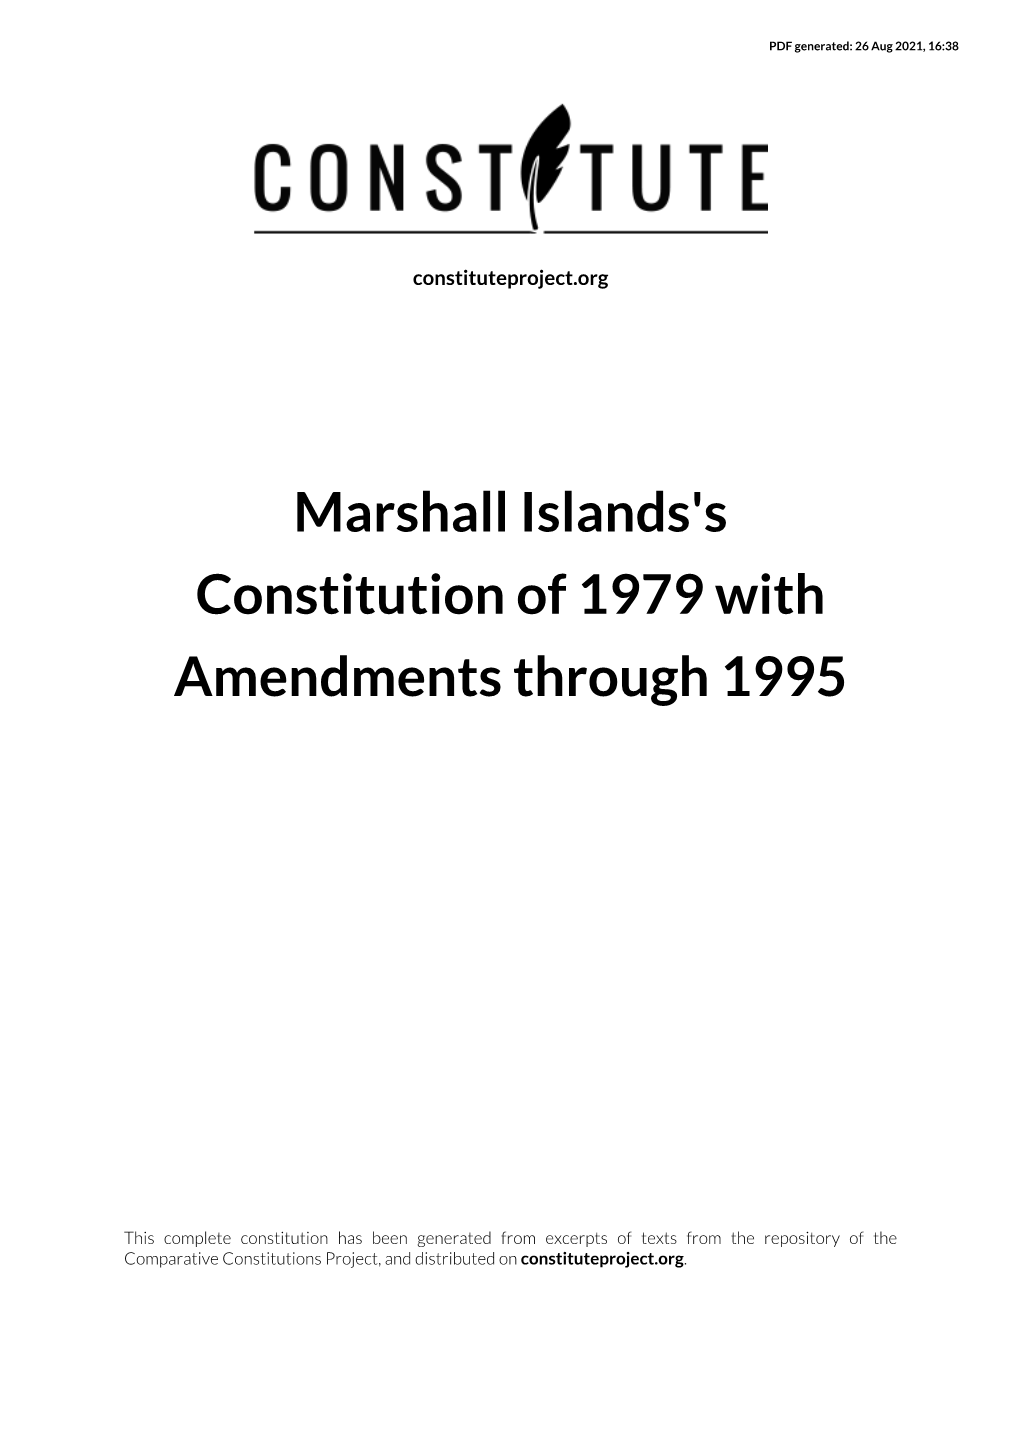 Marshall Islands's Constitution of 1979 with Amendments Through 1995